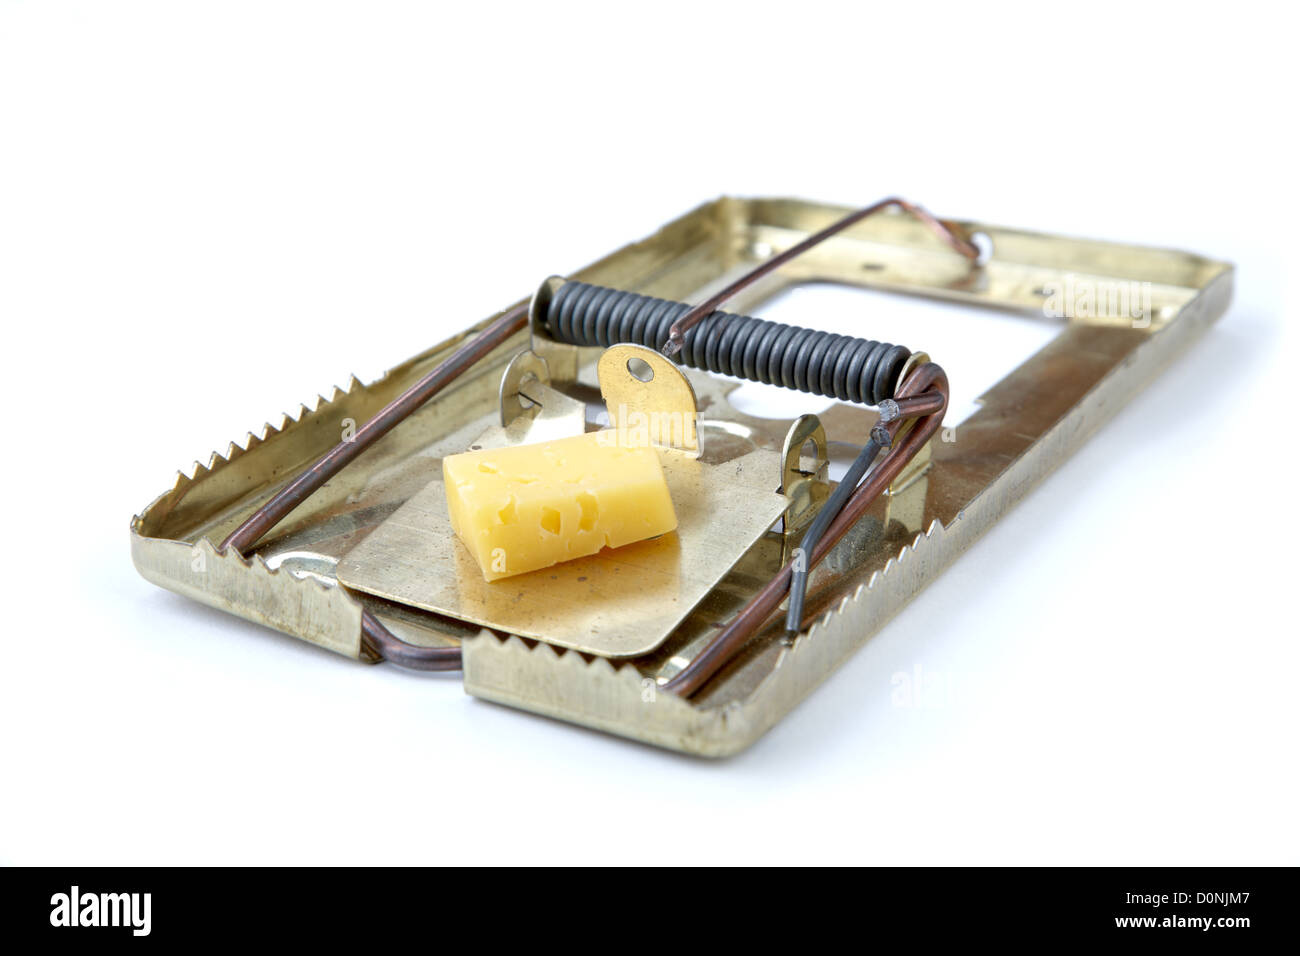 metallic mousetrap with cheese Stock Photo